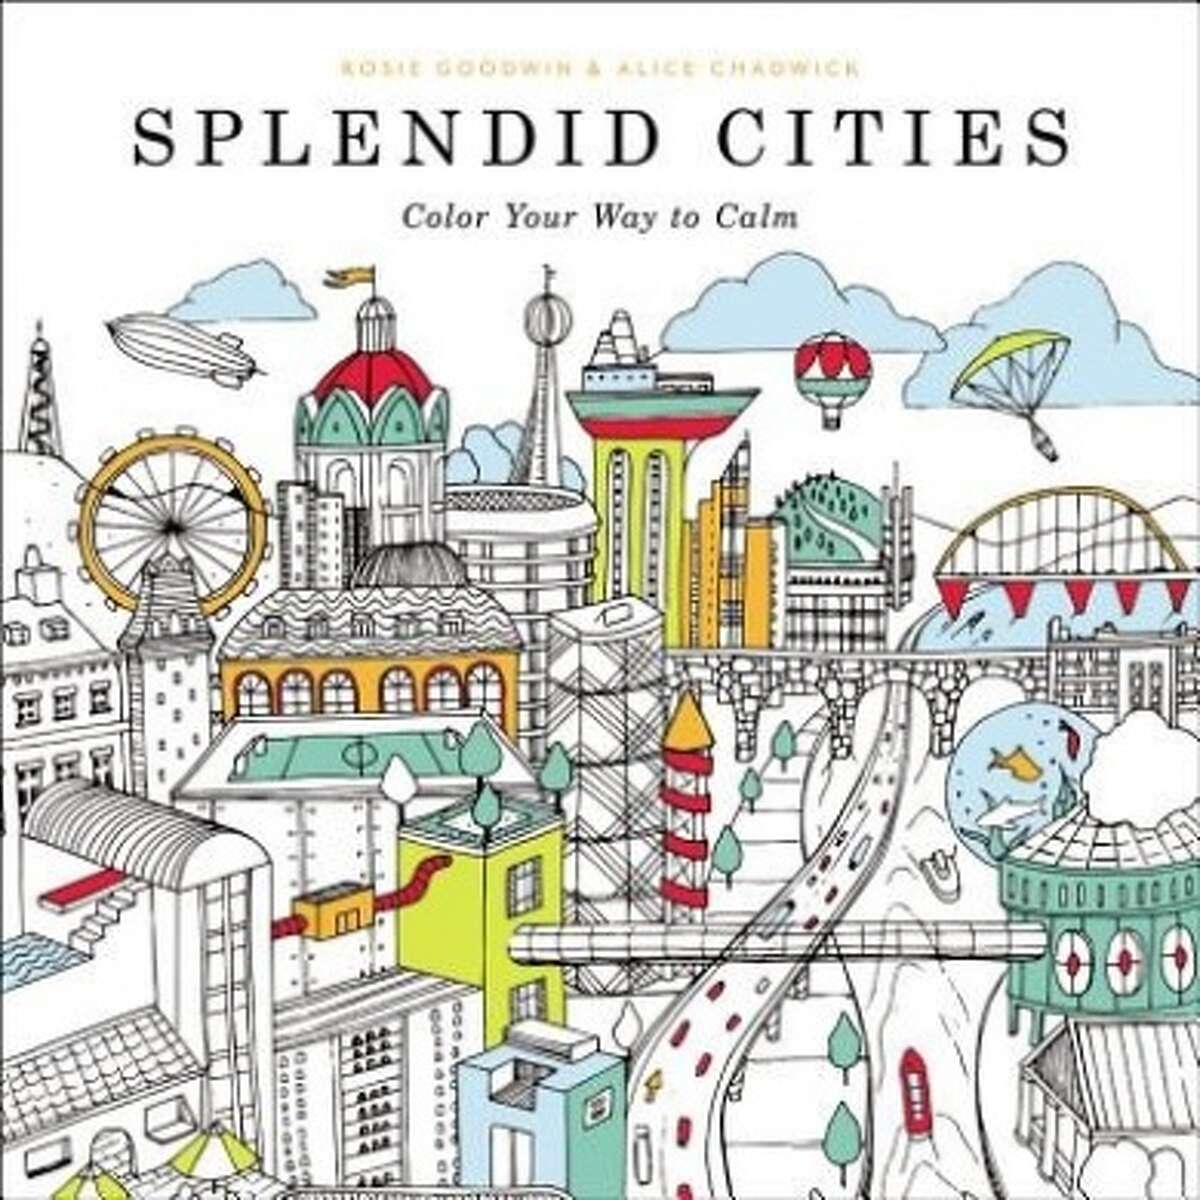 "Splendid Cities: Color Your Way to Calm"